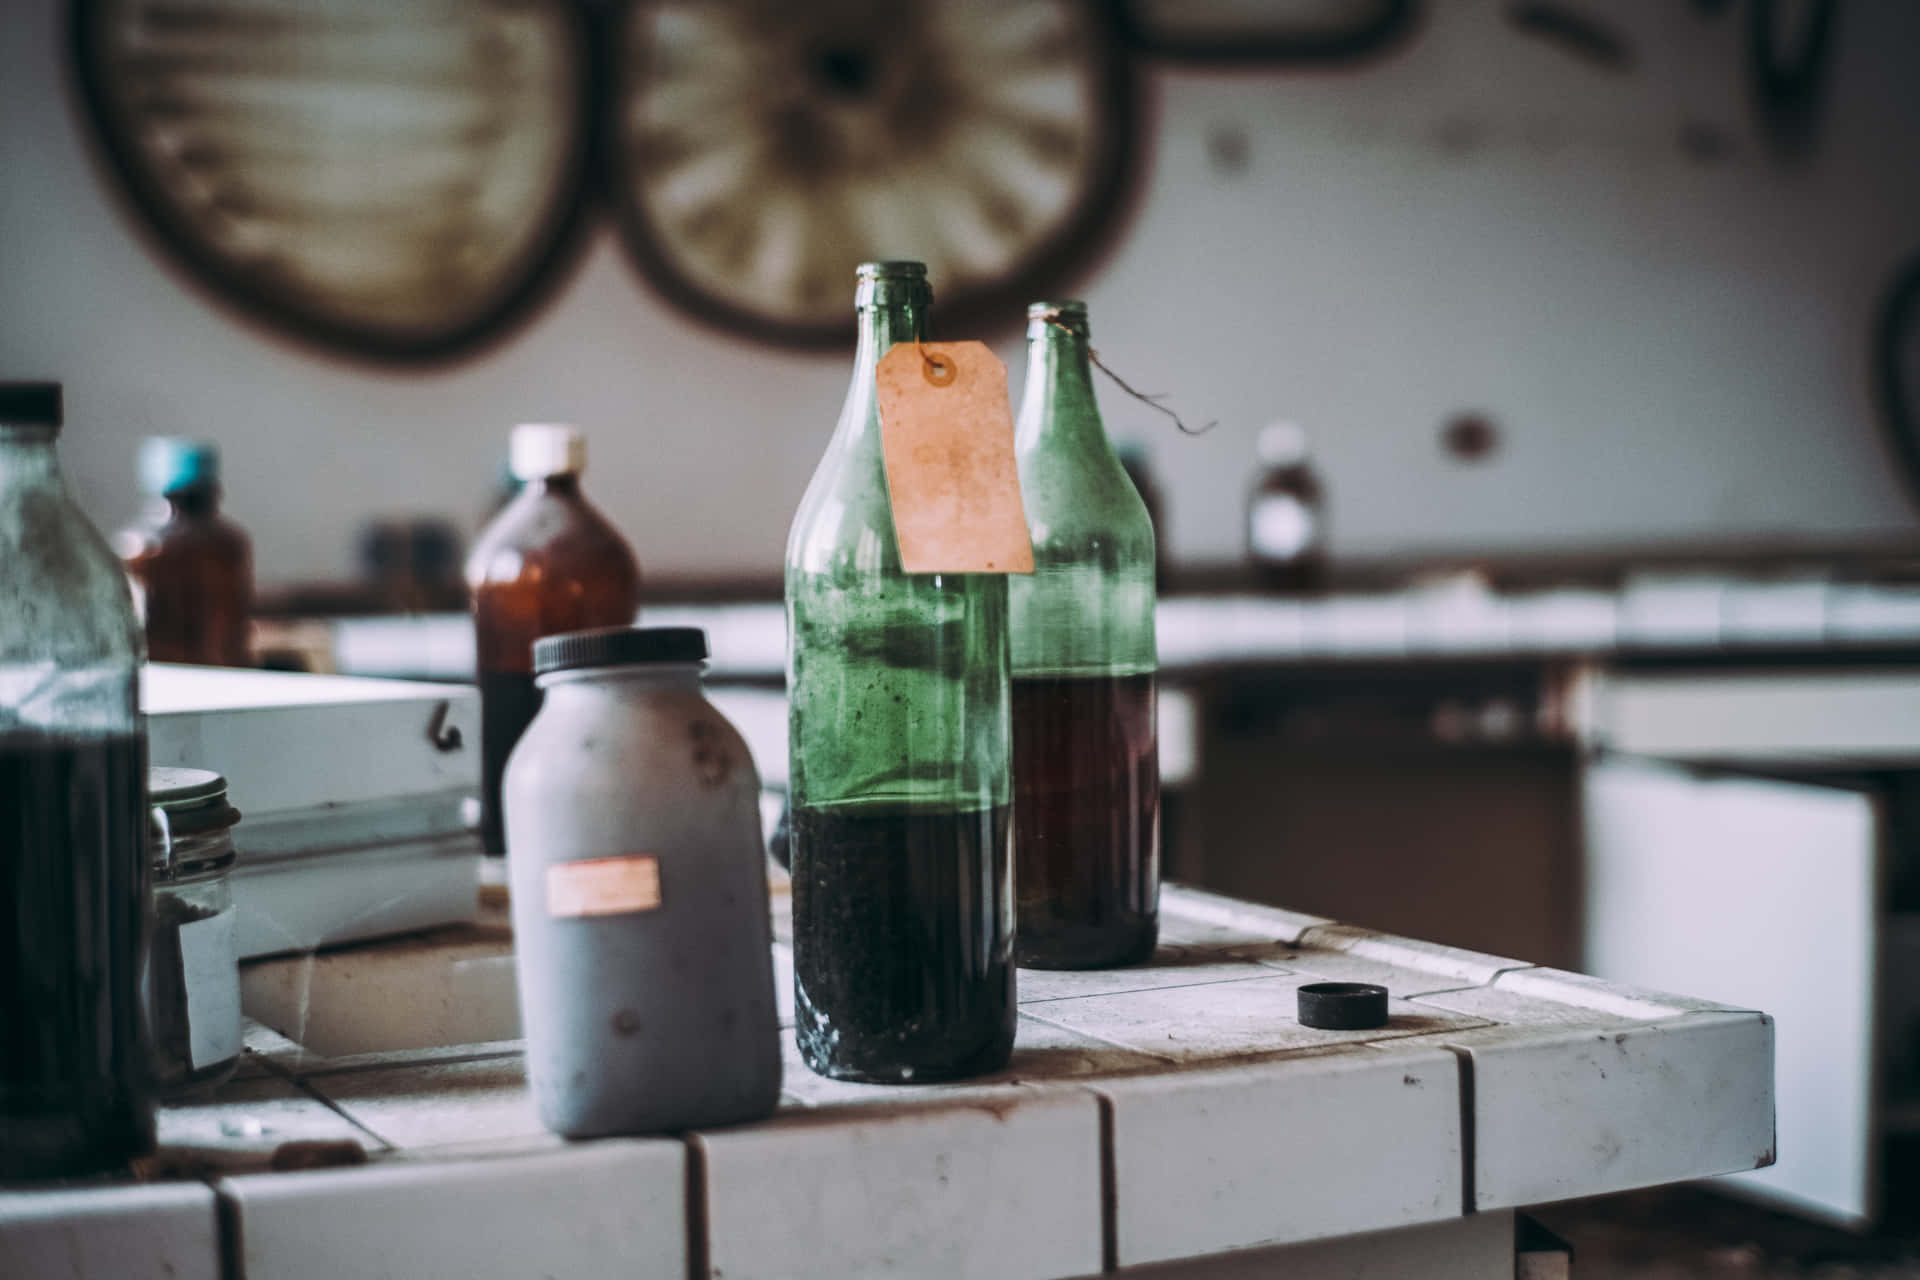 A Table With Bottles And Other Items On It Background